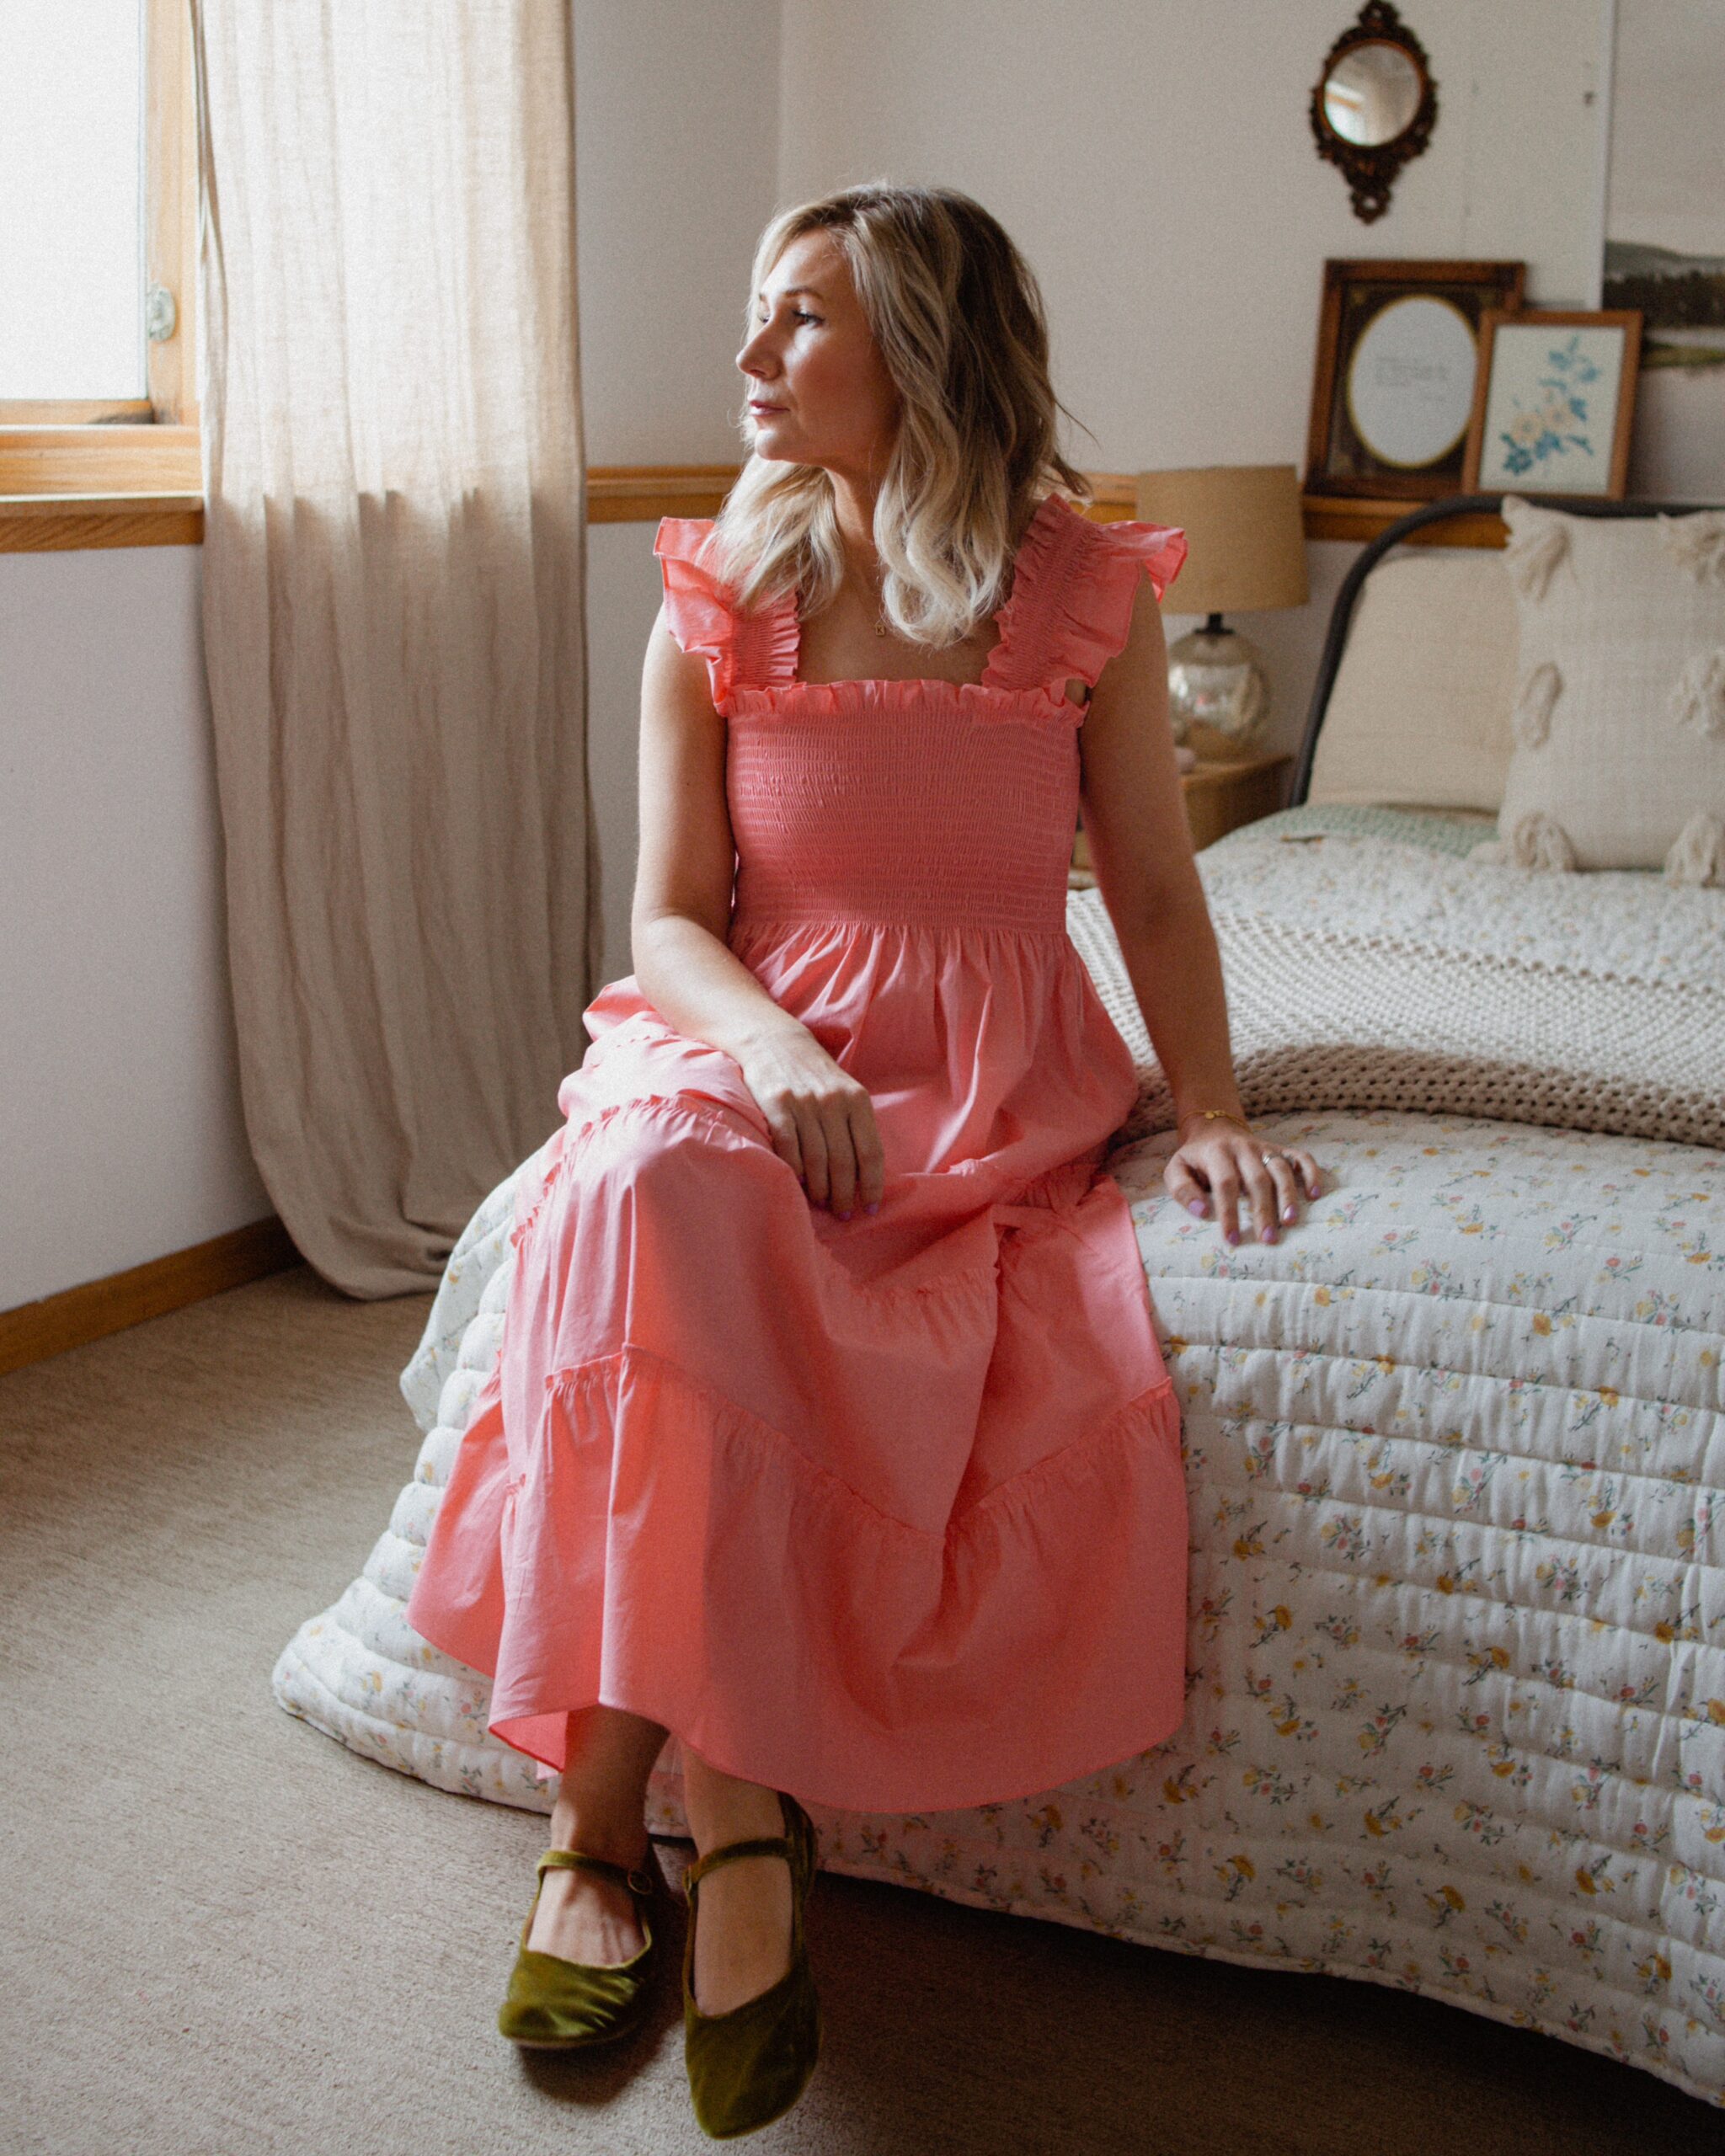 Karin Emily wears a bright pink dress and green velvet mary janes while sitting on a bed sharing her Sephora VIB sale picks